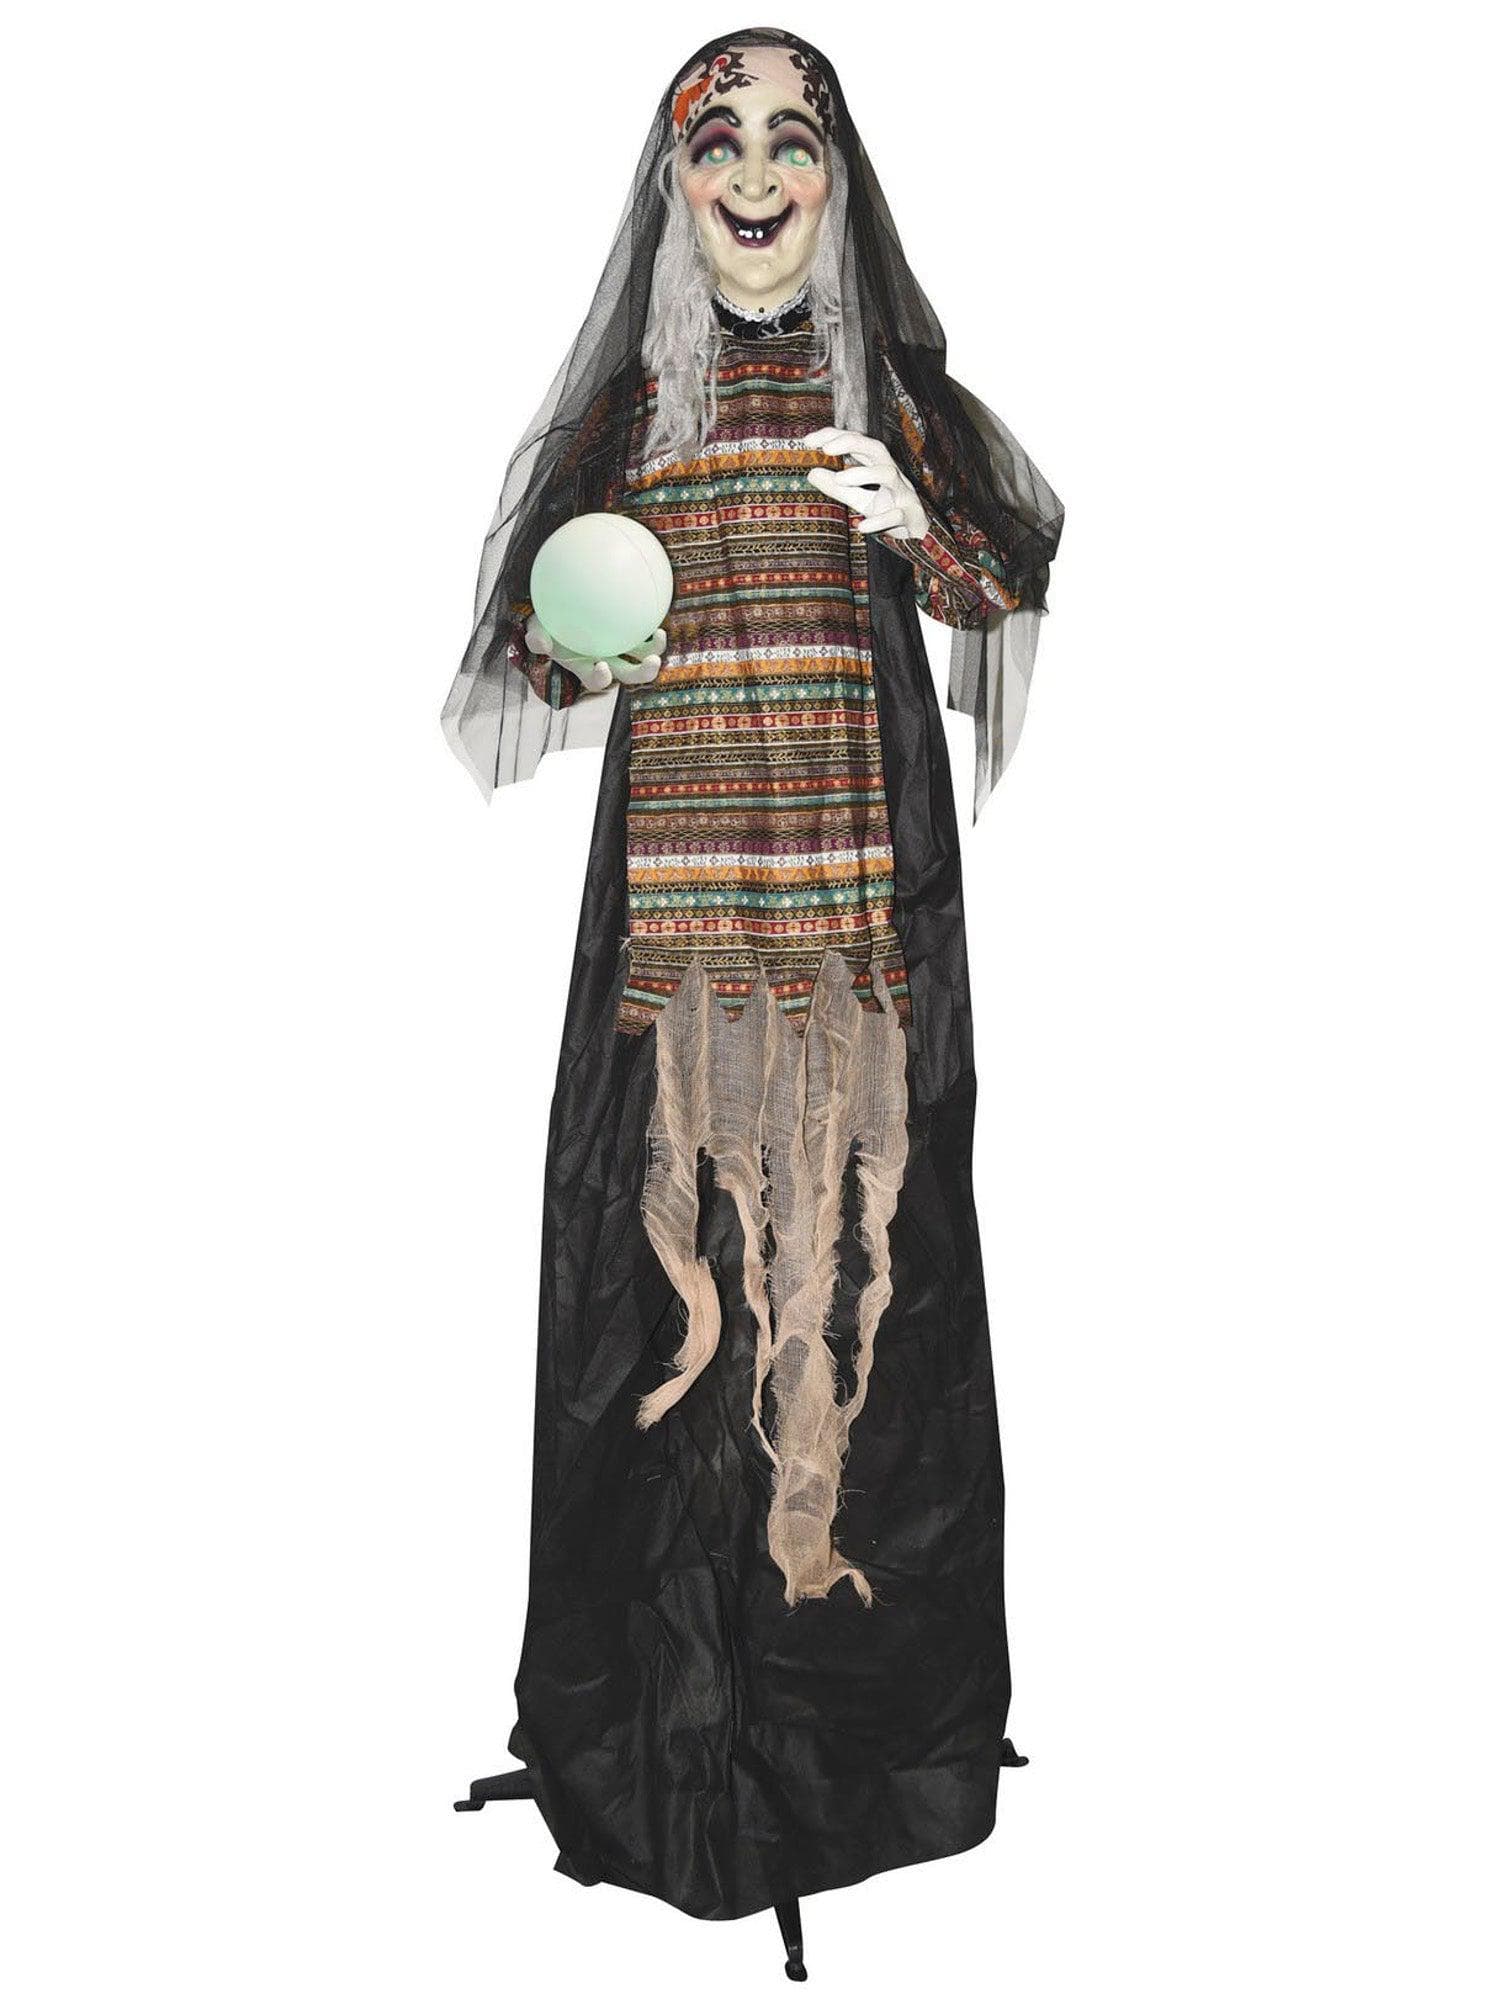 5 Foot Standing Fortune Teller Animated Prop - costumes.com